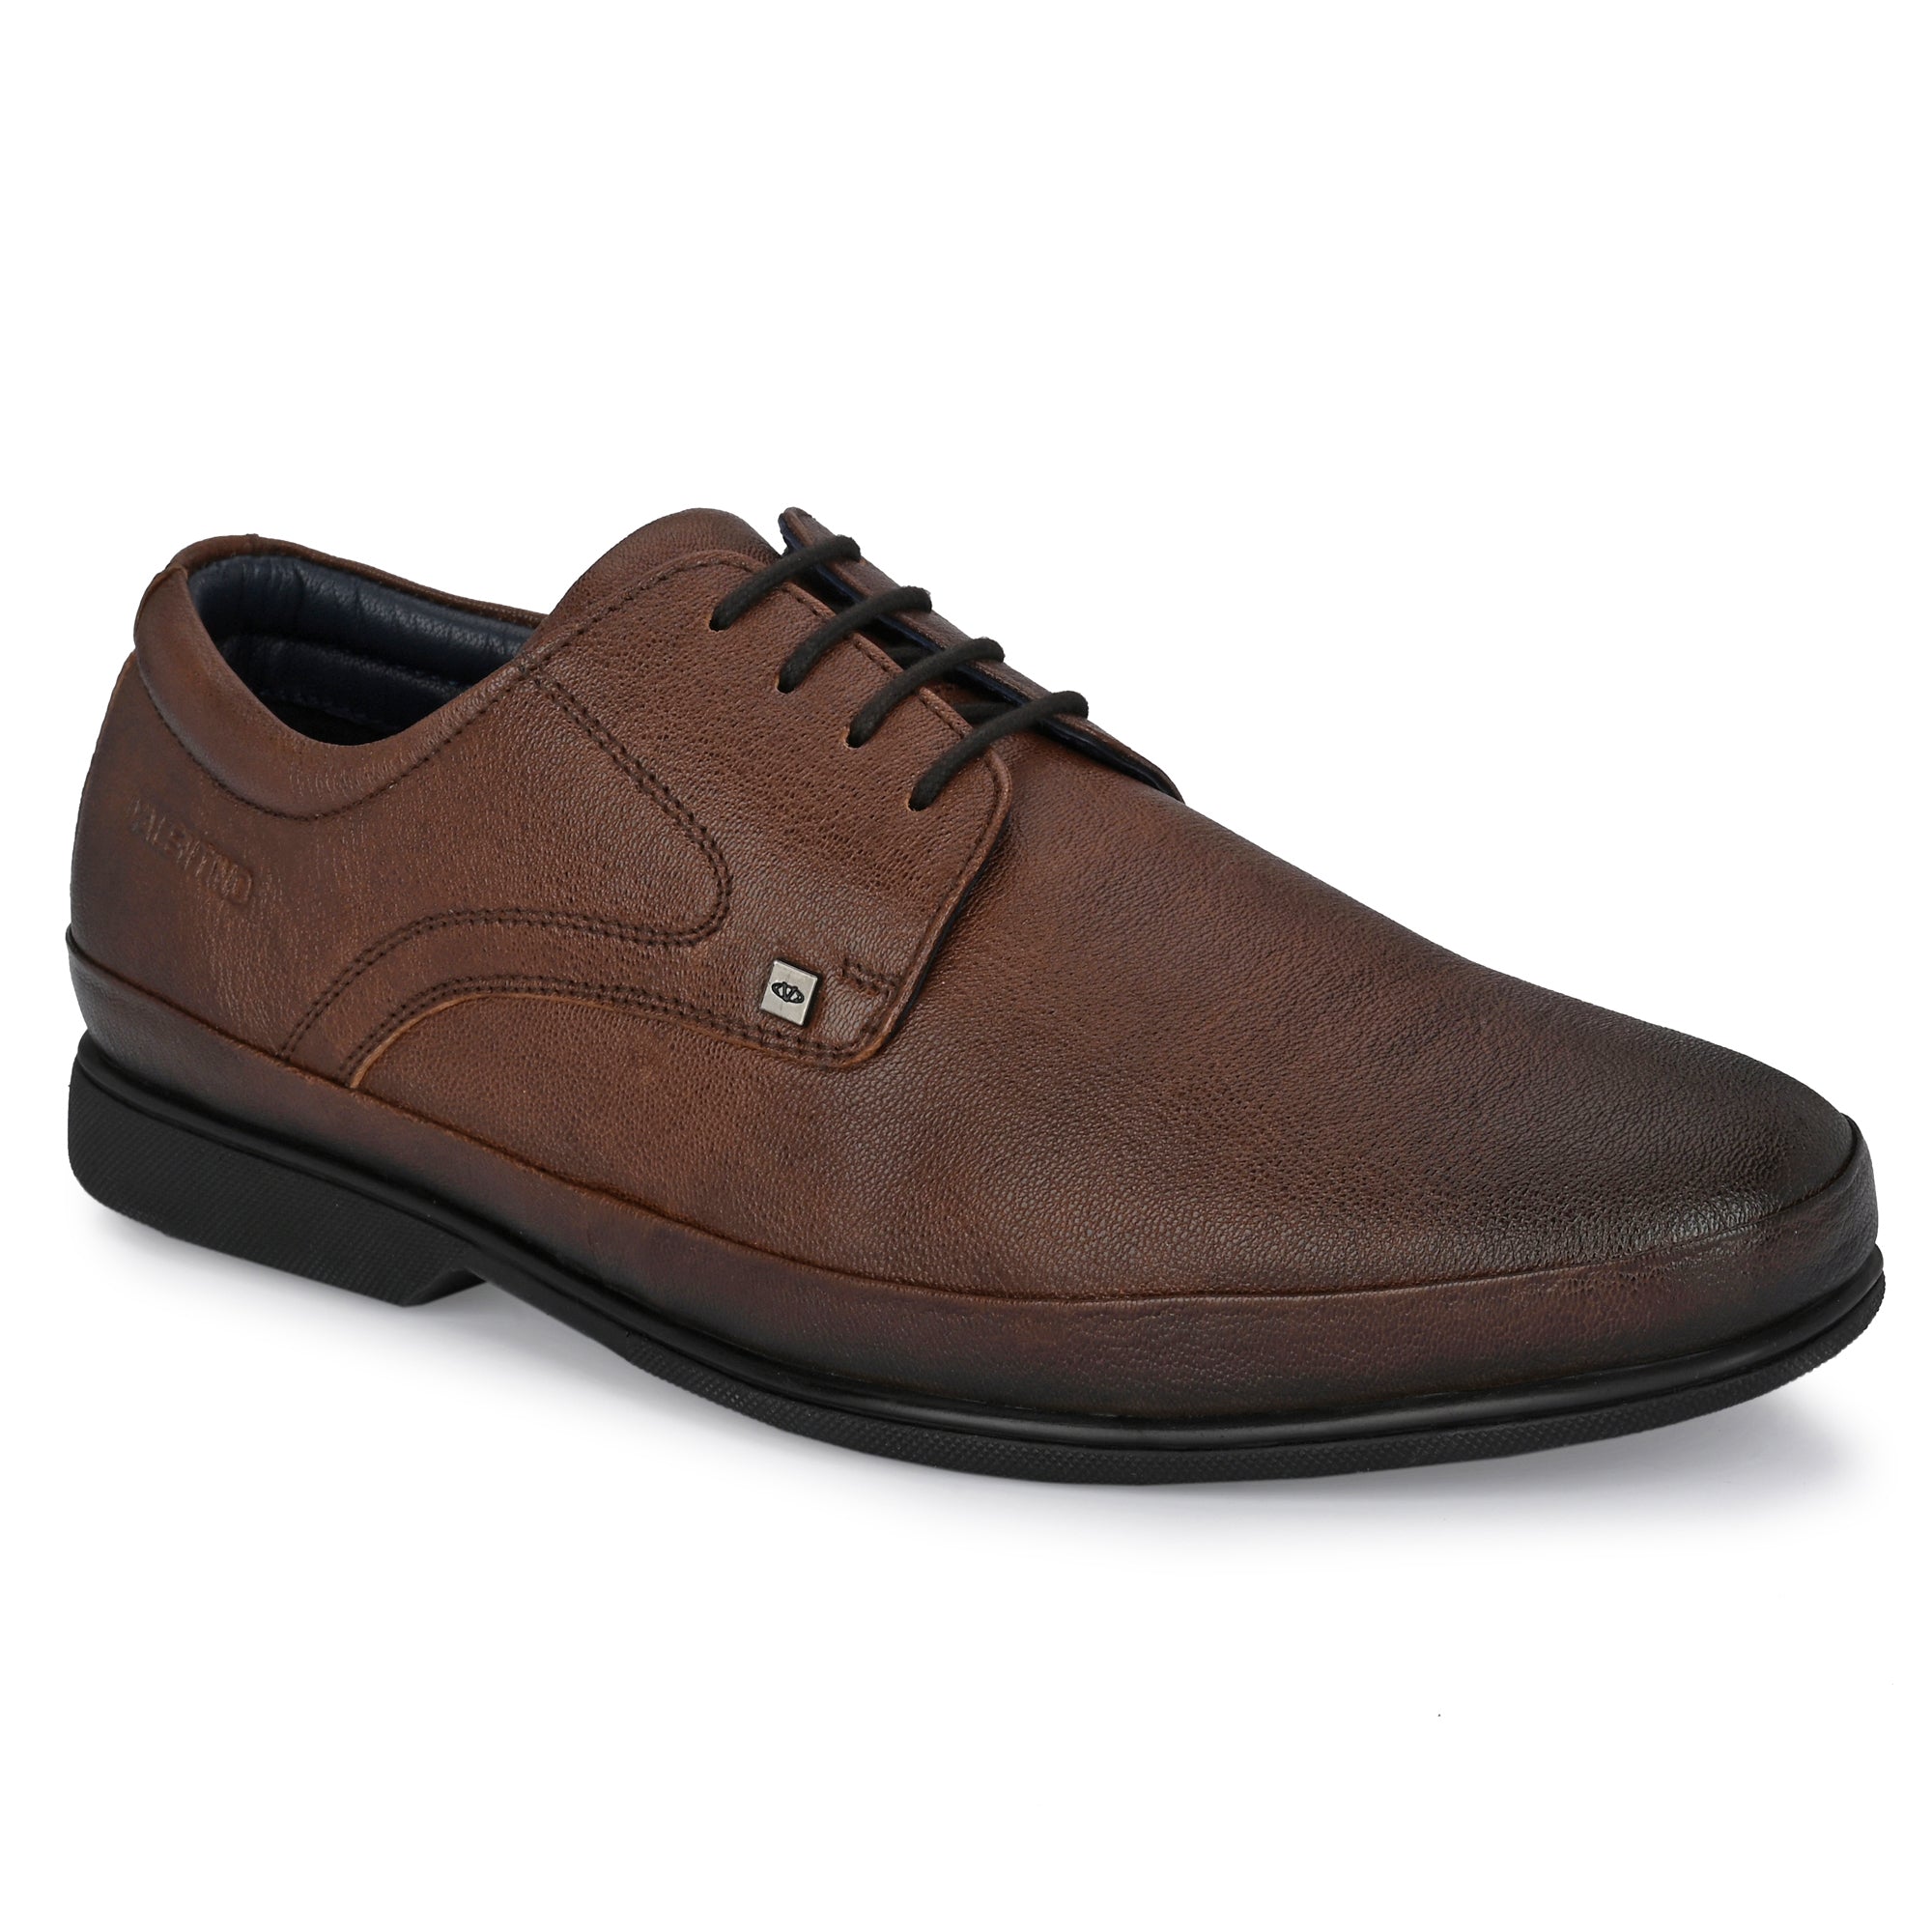 GATEWAY-52 MEN LEATHER BROWN FORMAL LACE UP DERBY